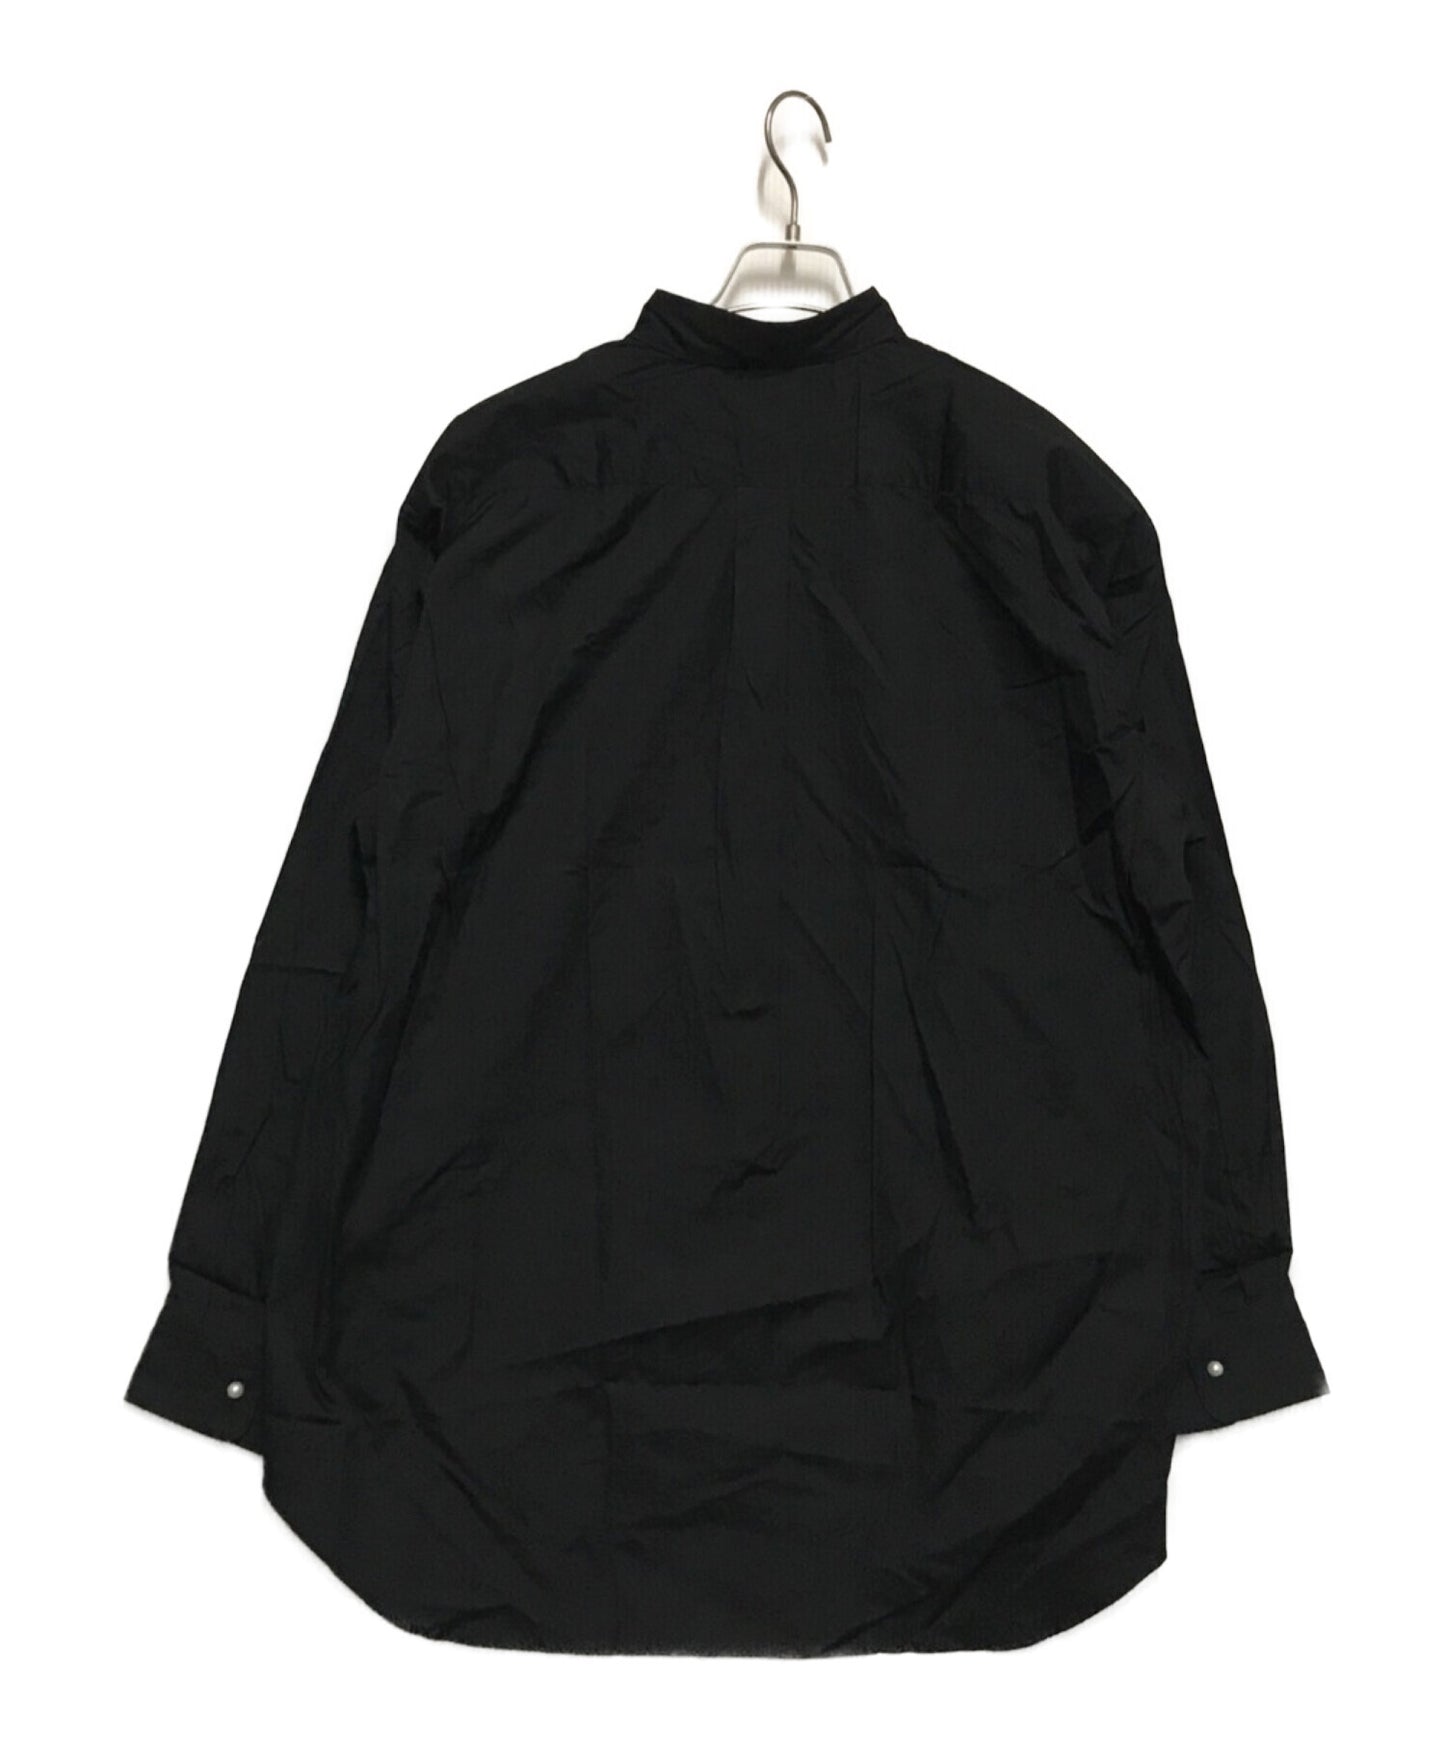 Comme des Garcons Homme Plus Mother-of-Pearl 버튼 다운 셔츠